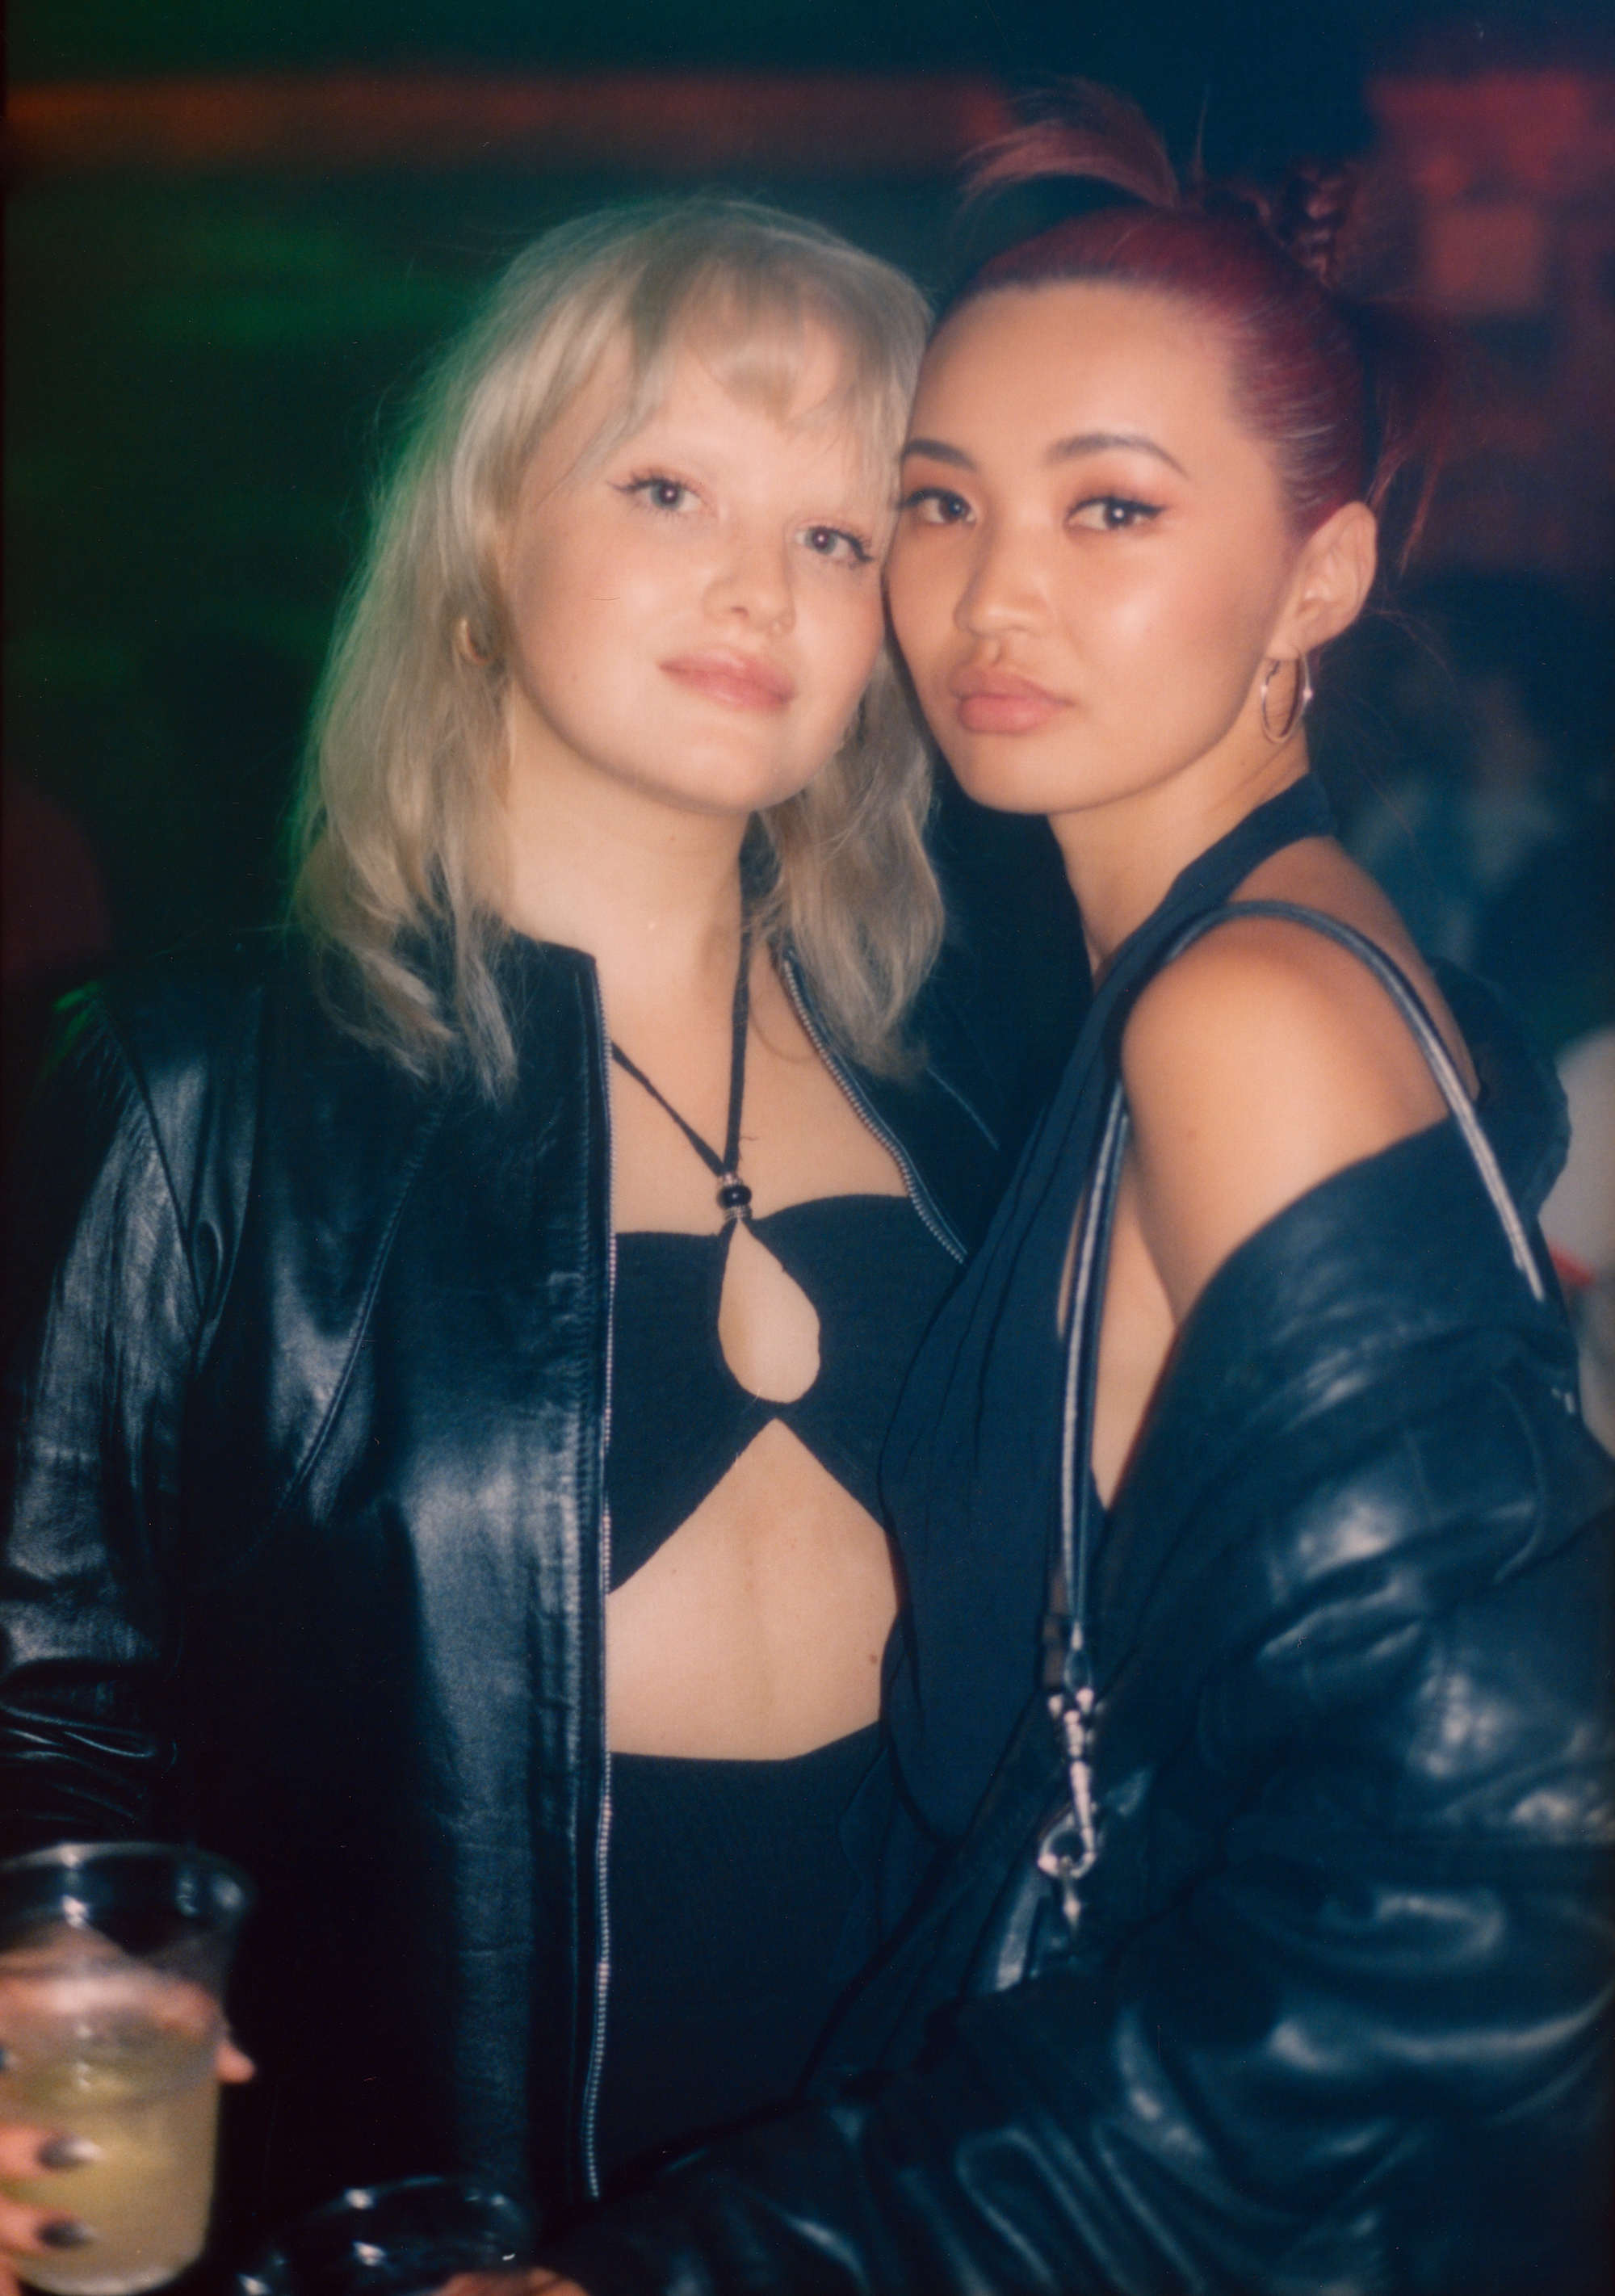 Laura Pitcher and Kat Qu at Paradis ID Marc Jacobs Party in NYC by Karl-Hens Pompilus